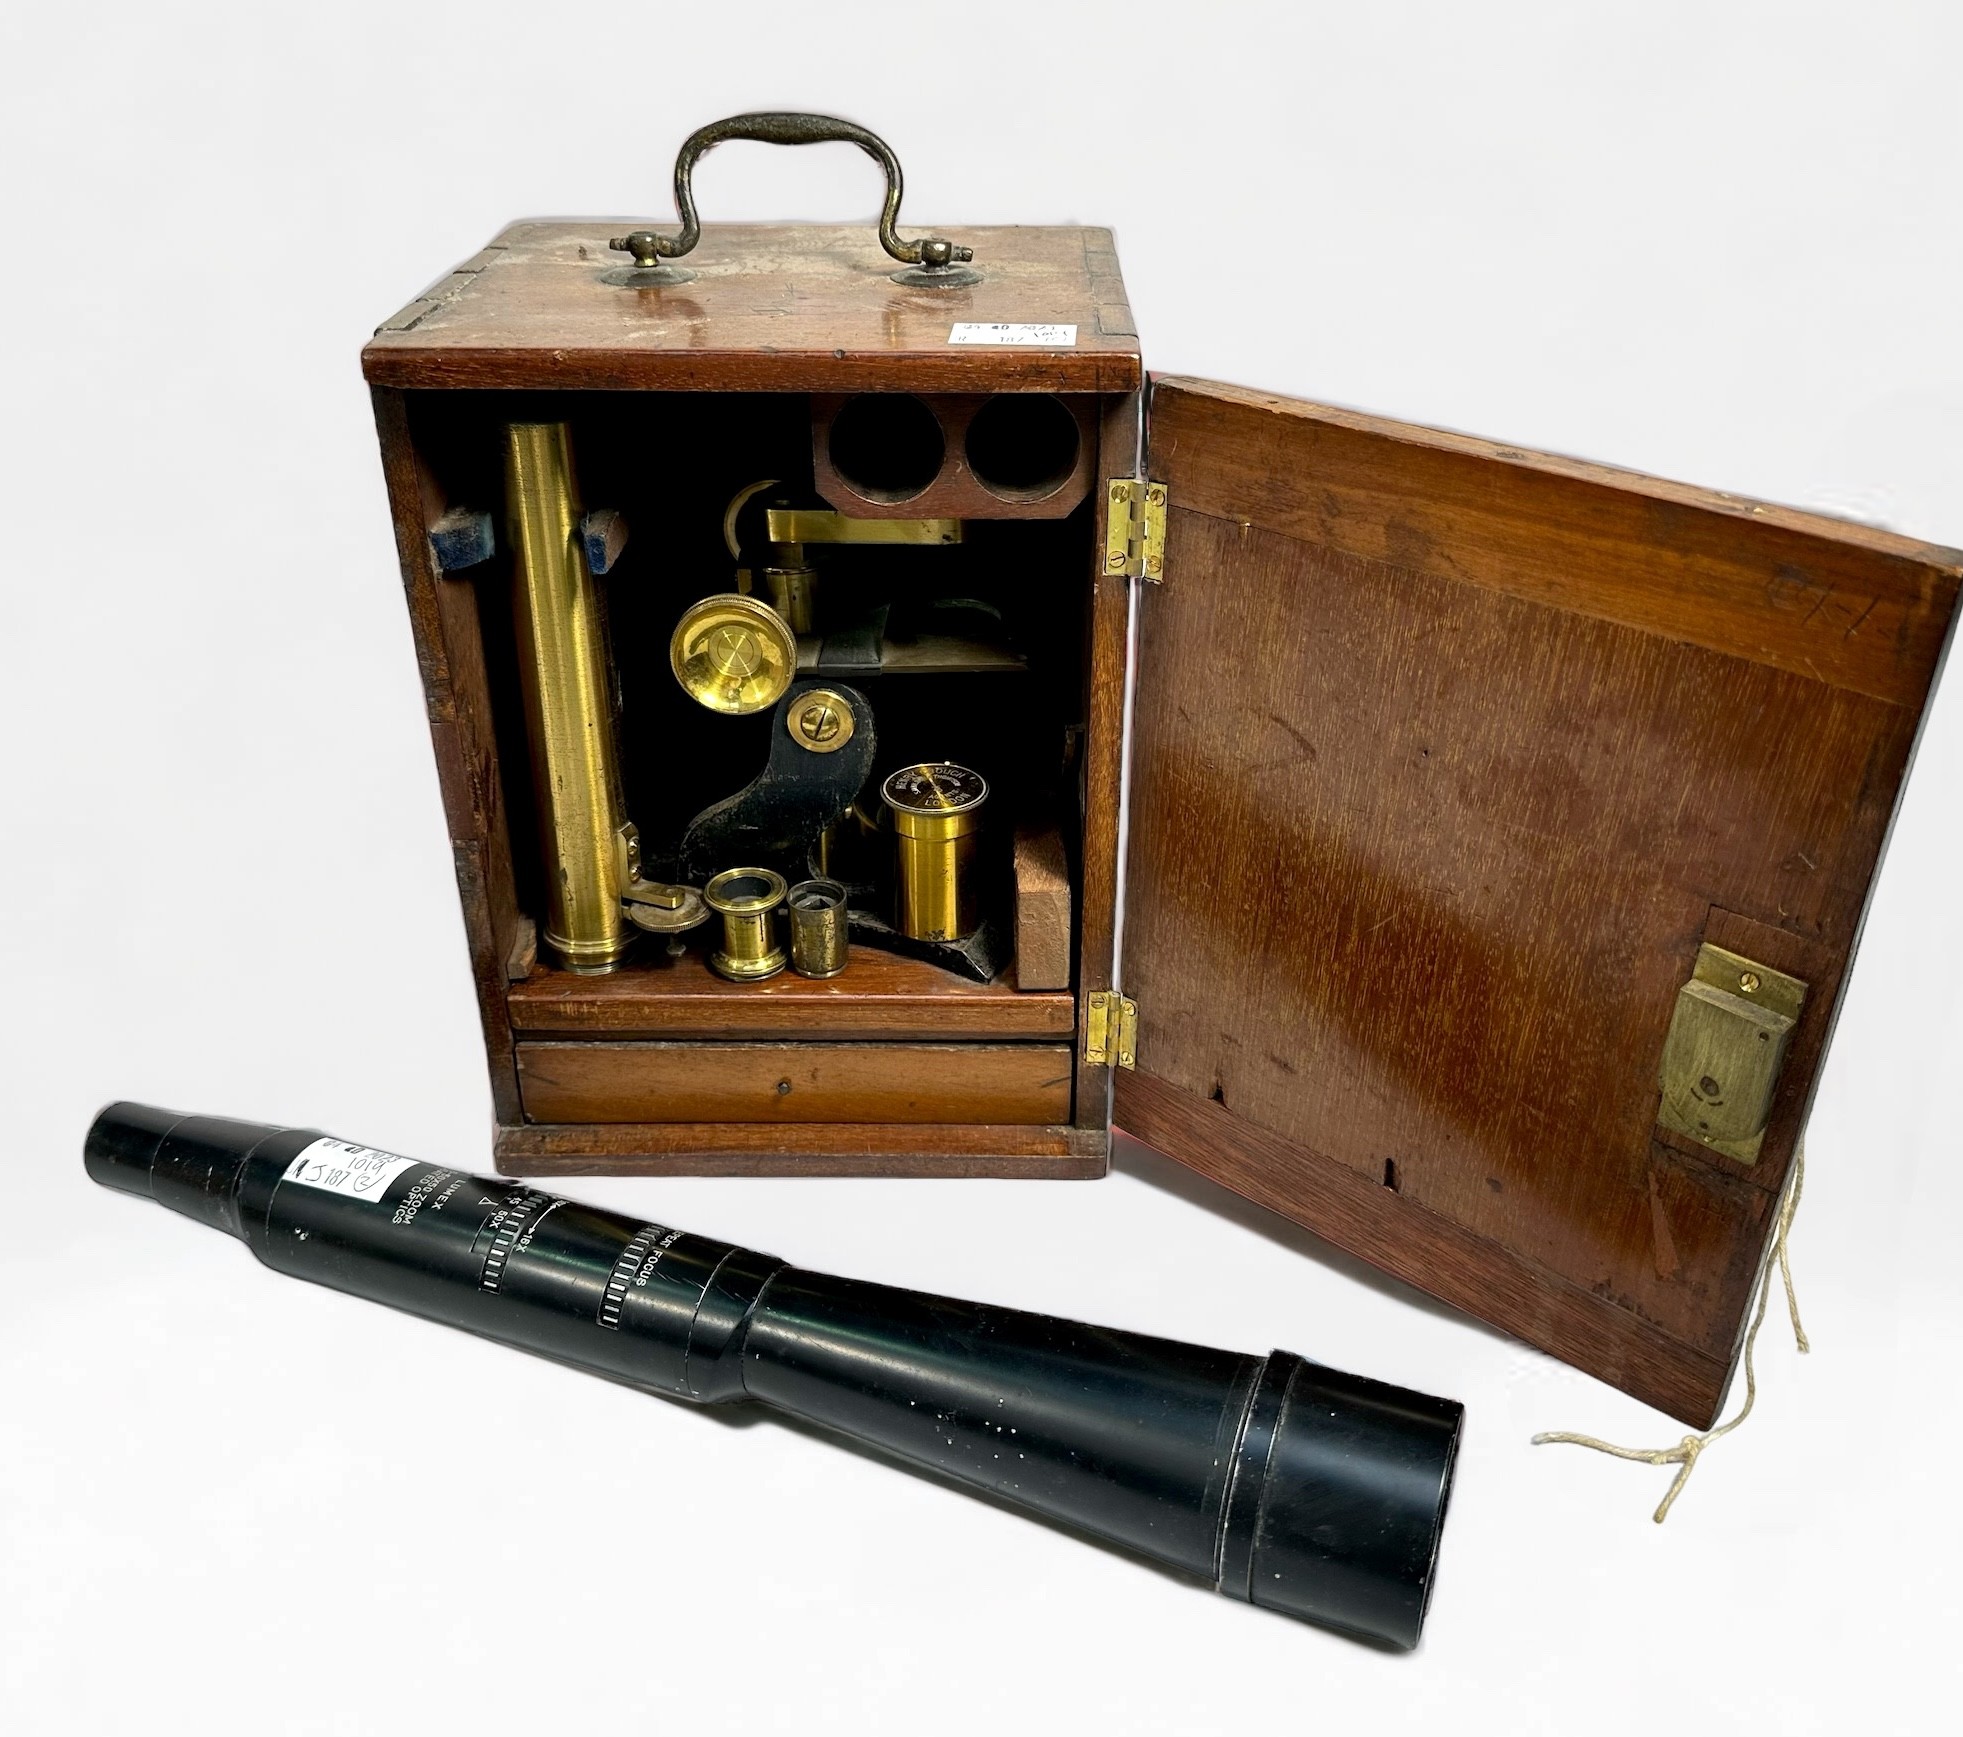 A Microscope by Henry Crouch, lacquered brassware and black frame, with selection of glass